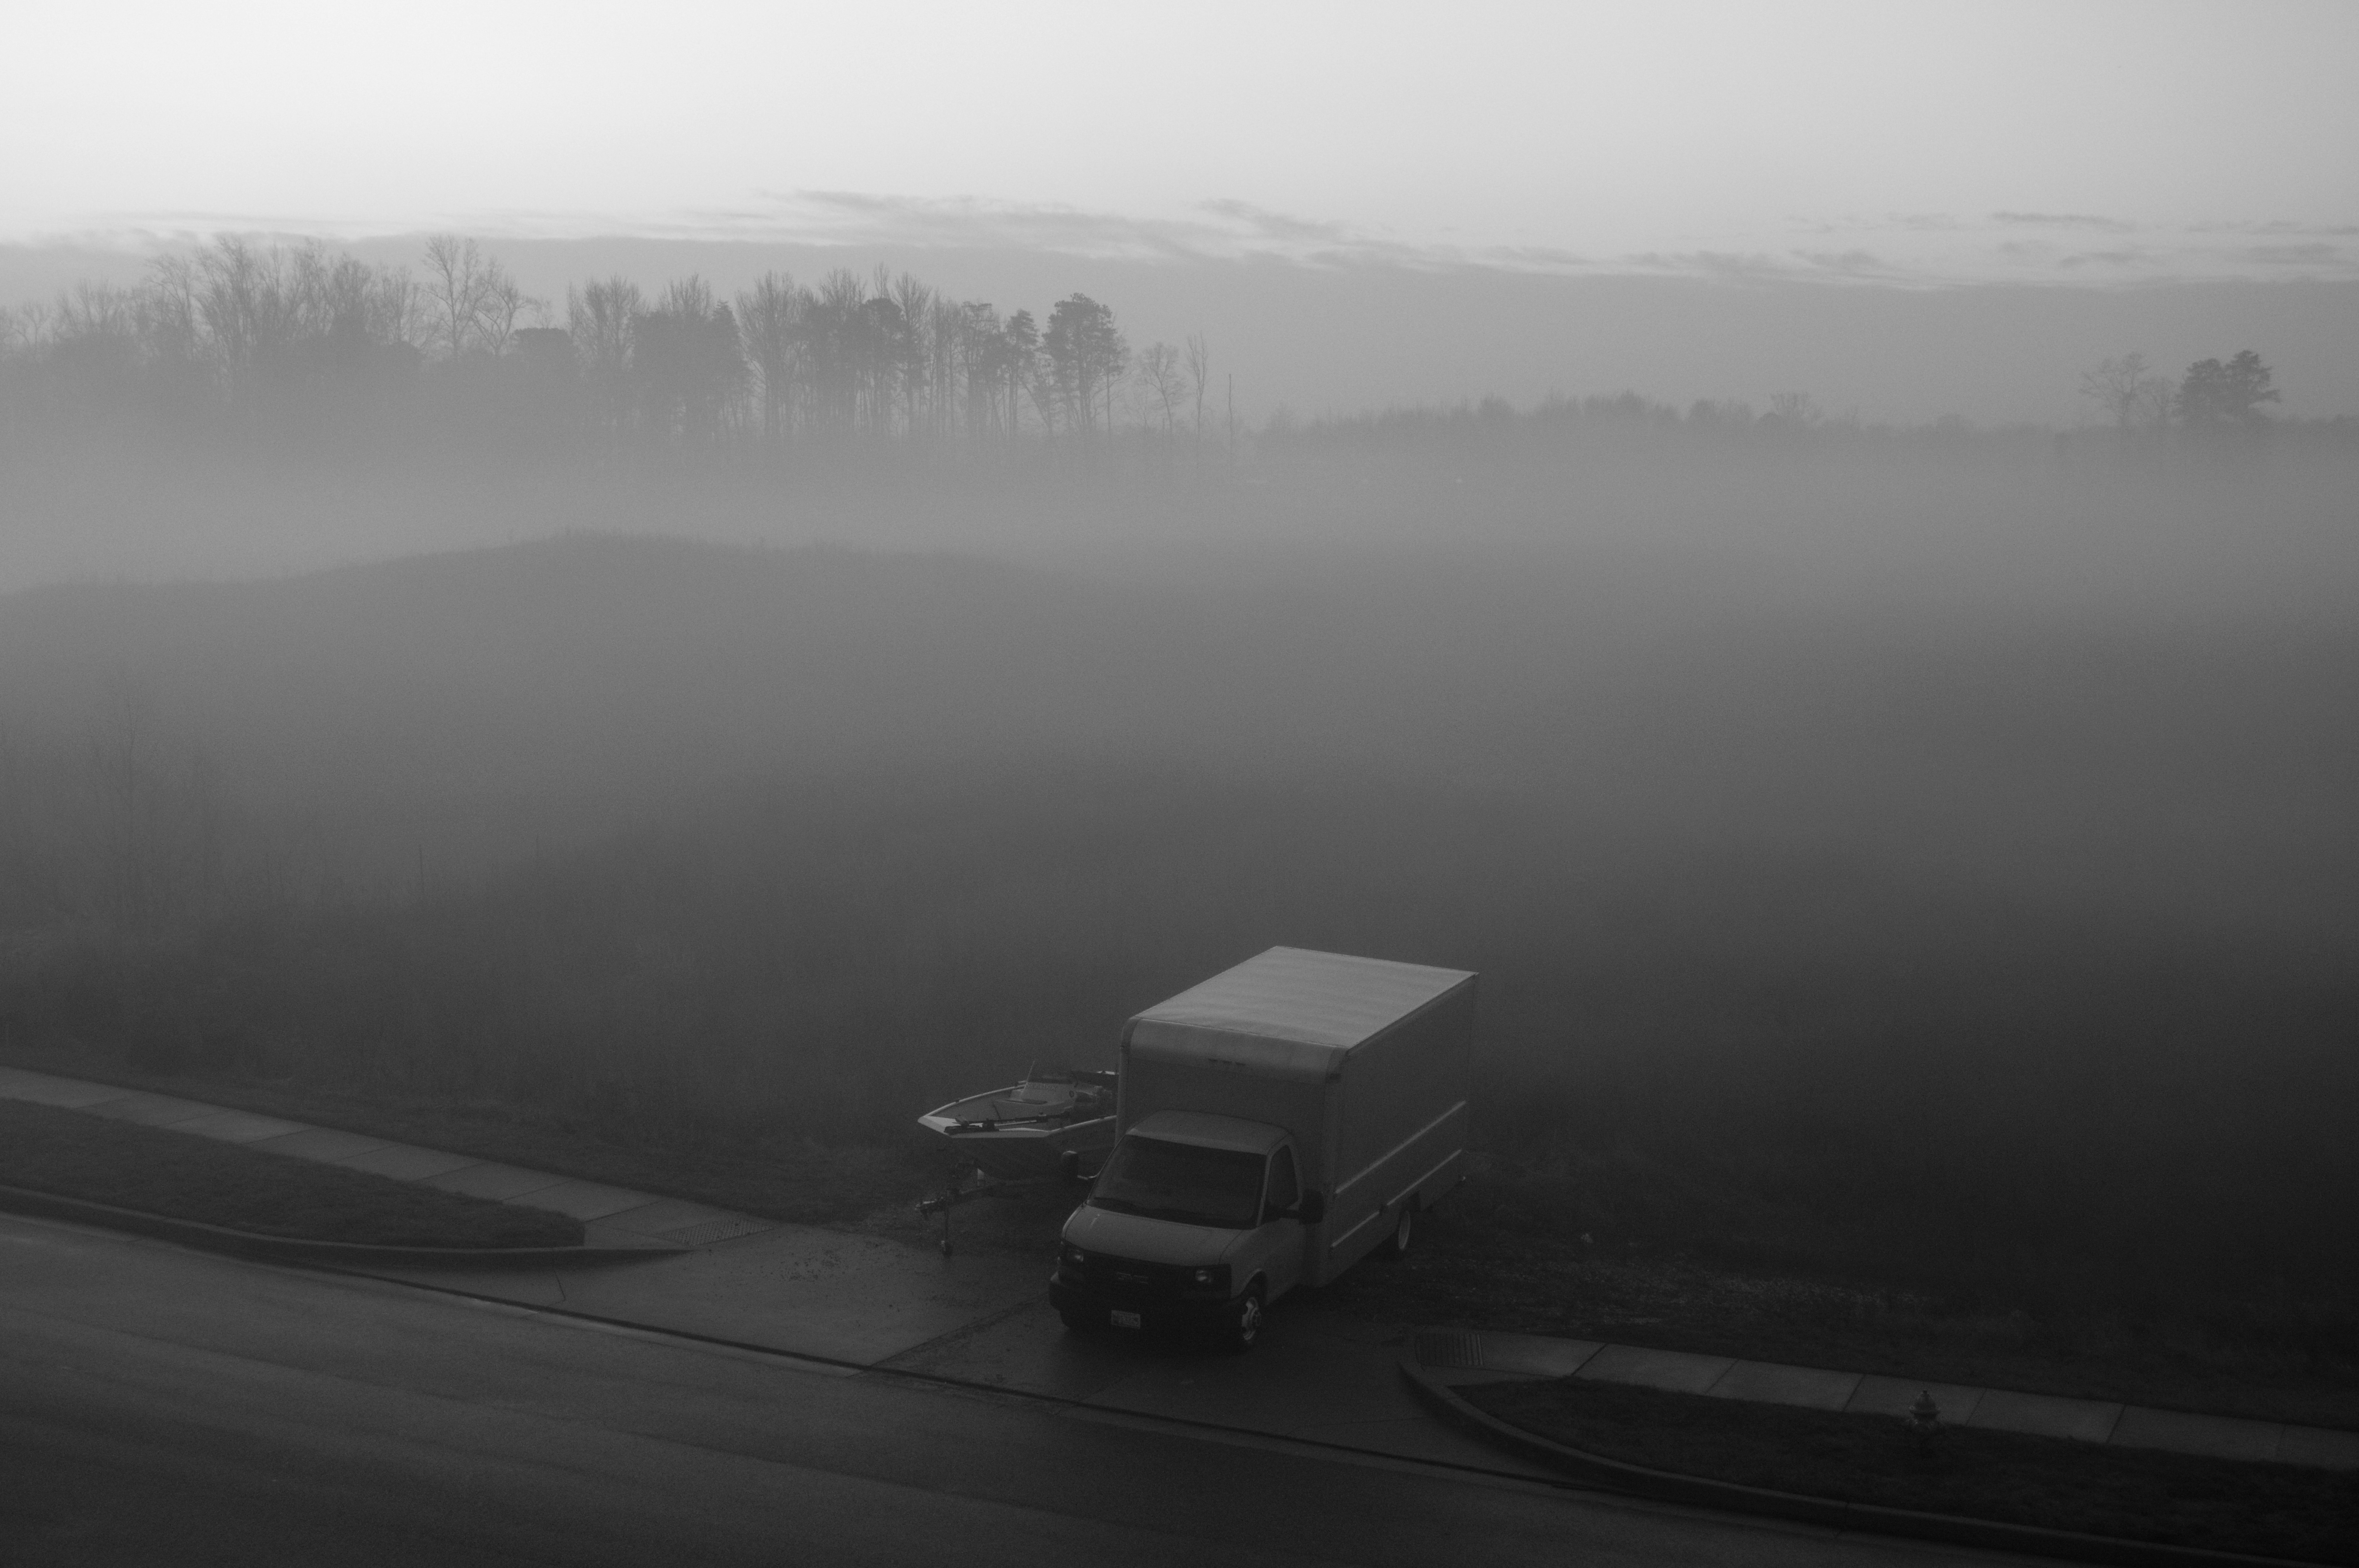 Truck and Boat in the Fog